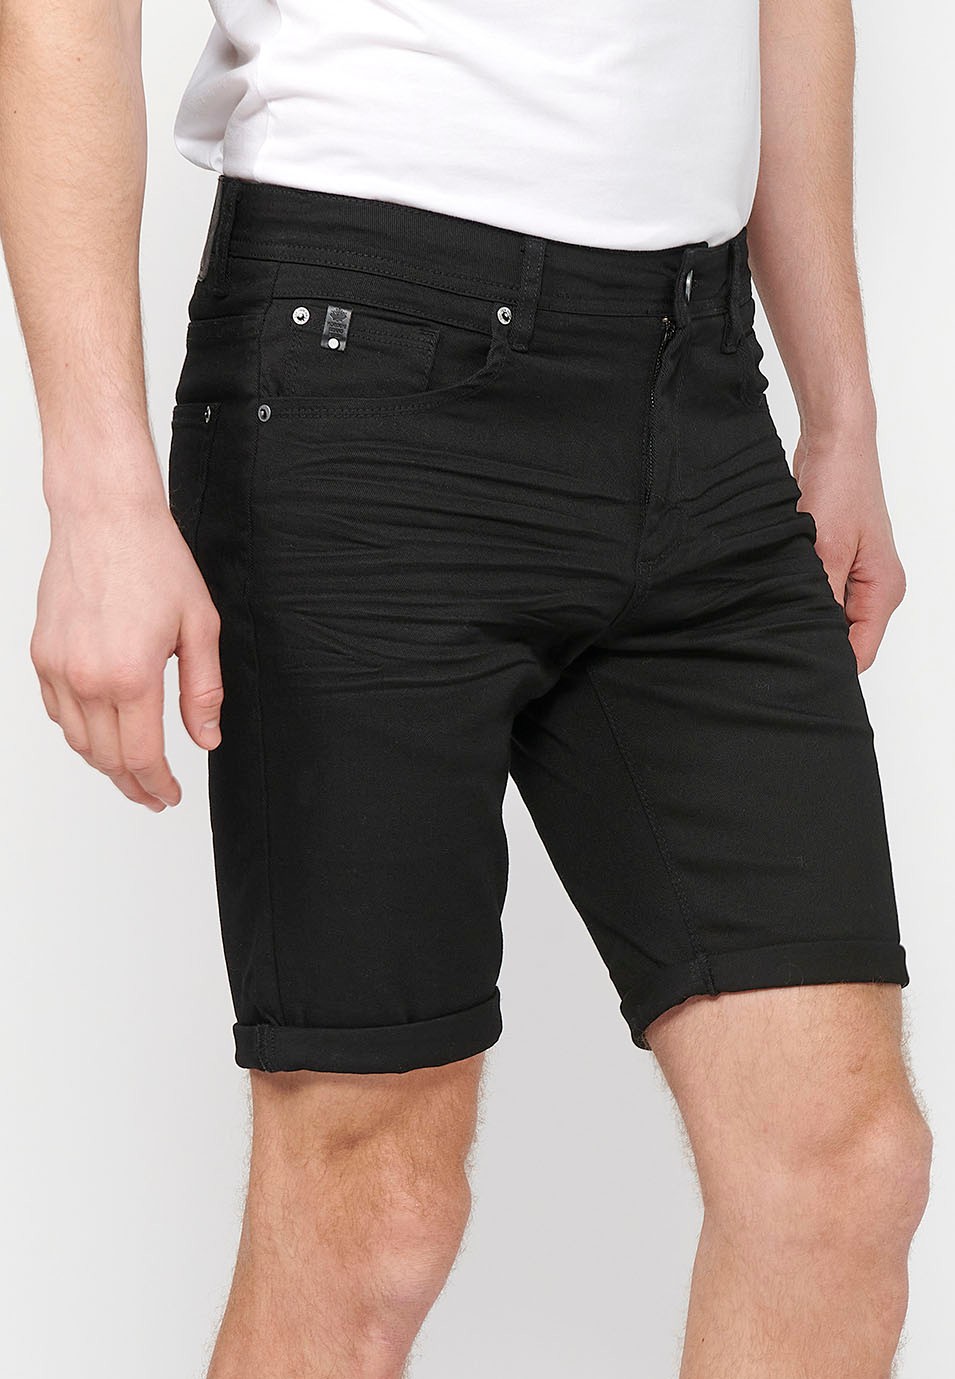 Denim Bermuda shorts with cuffed finish and front zipper and button closure. Five pockets, one black color pocket for men 3